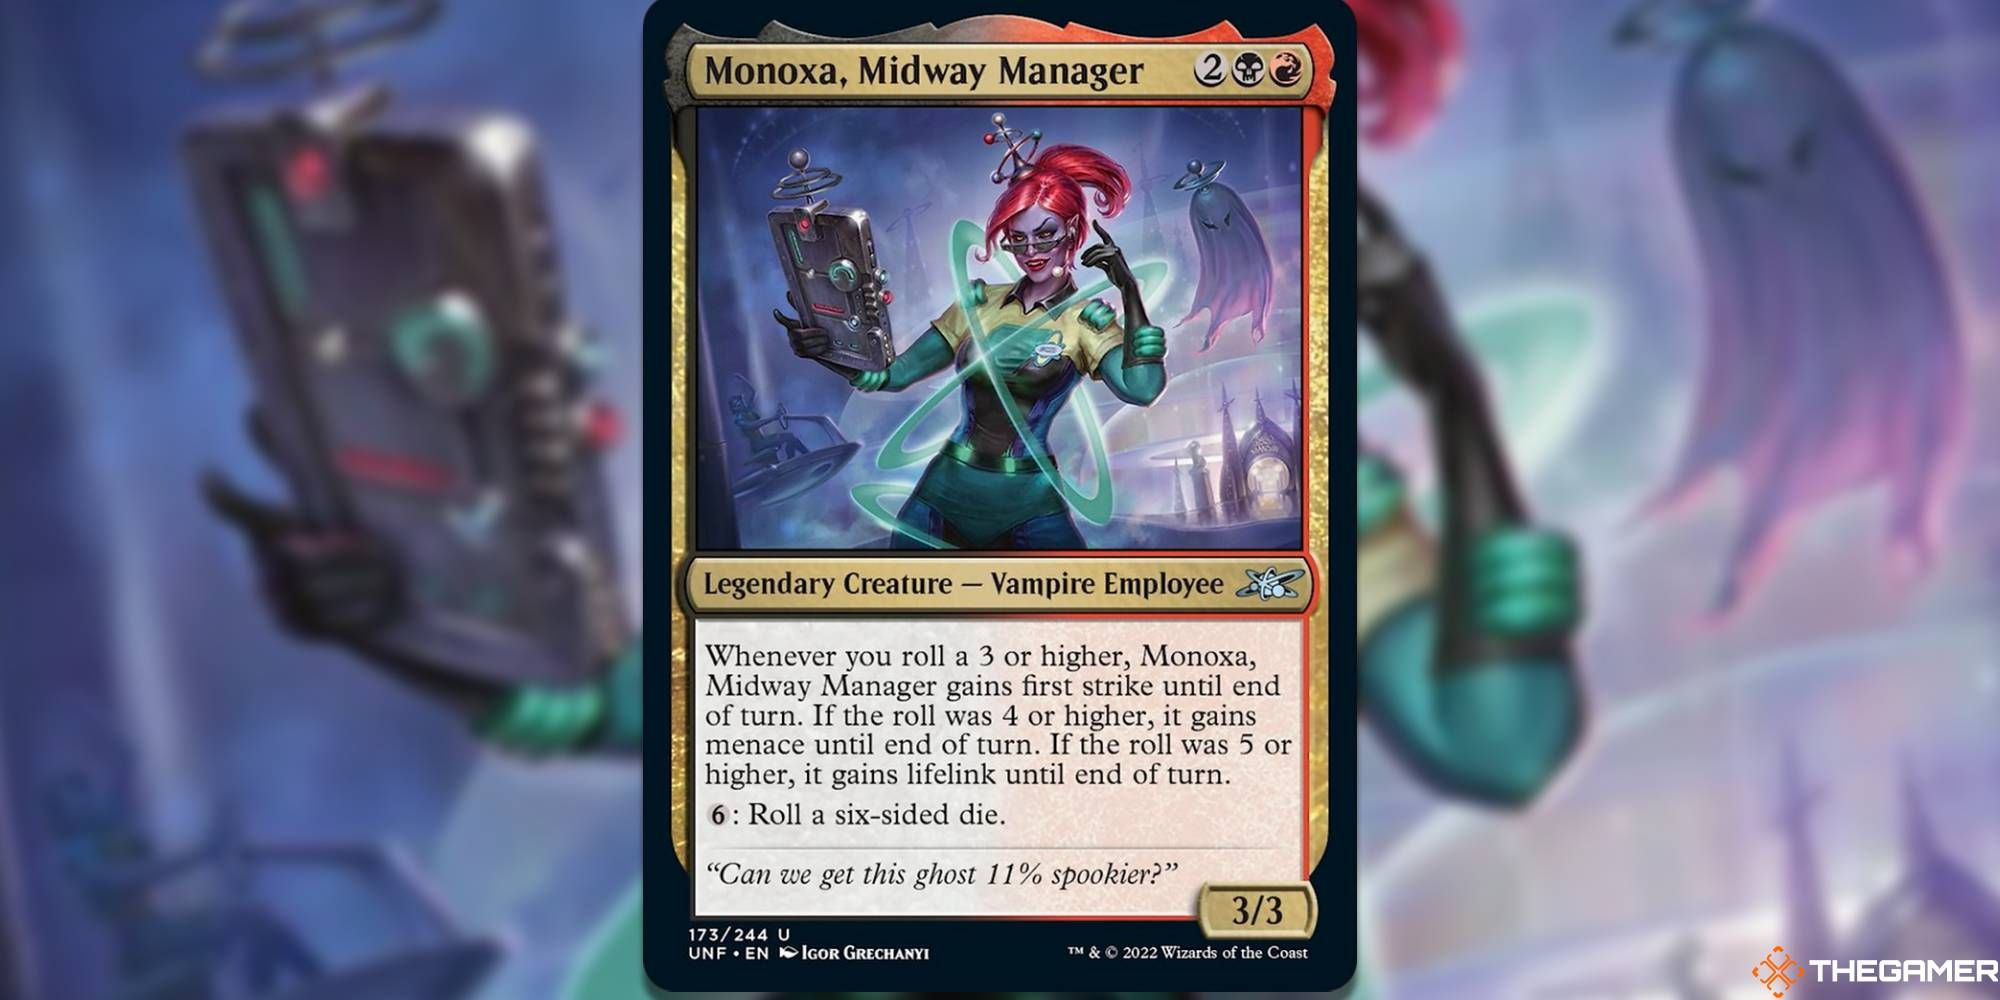 Monoxa, Midway Manager